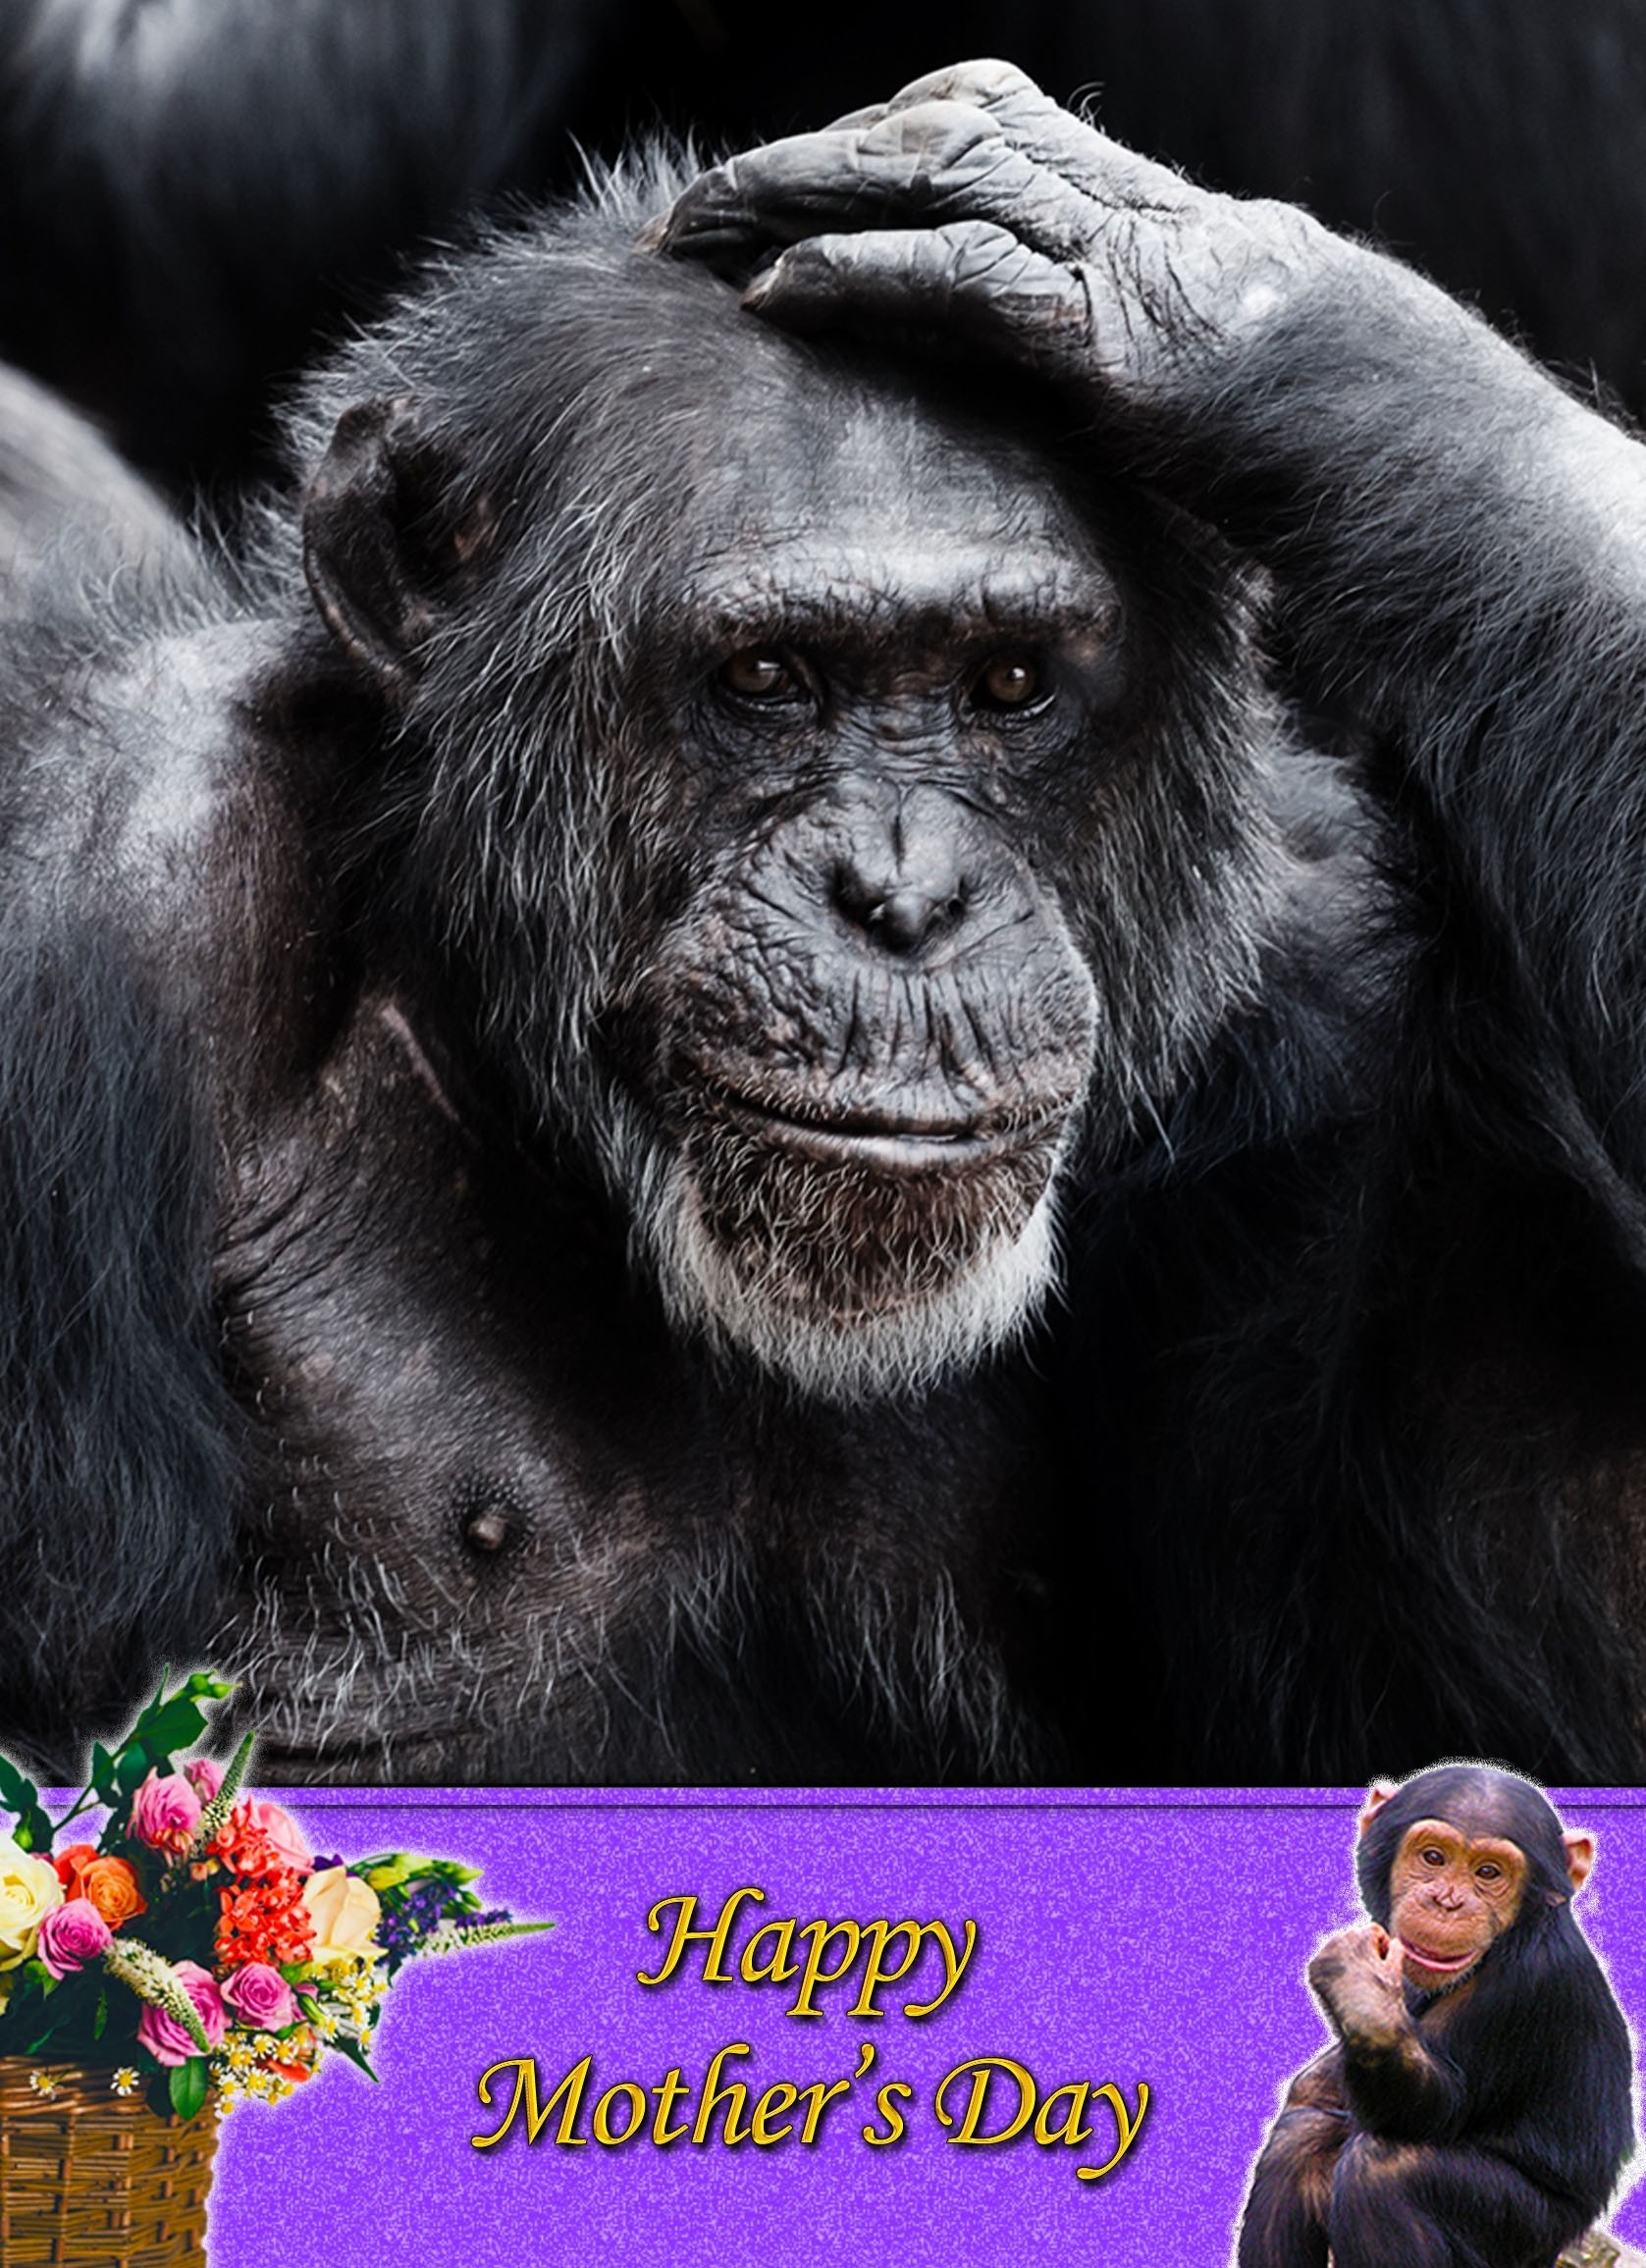 Chimpanzee Mother's Day Card